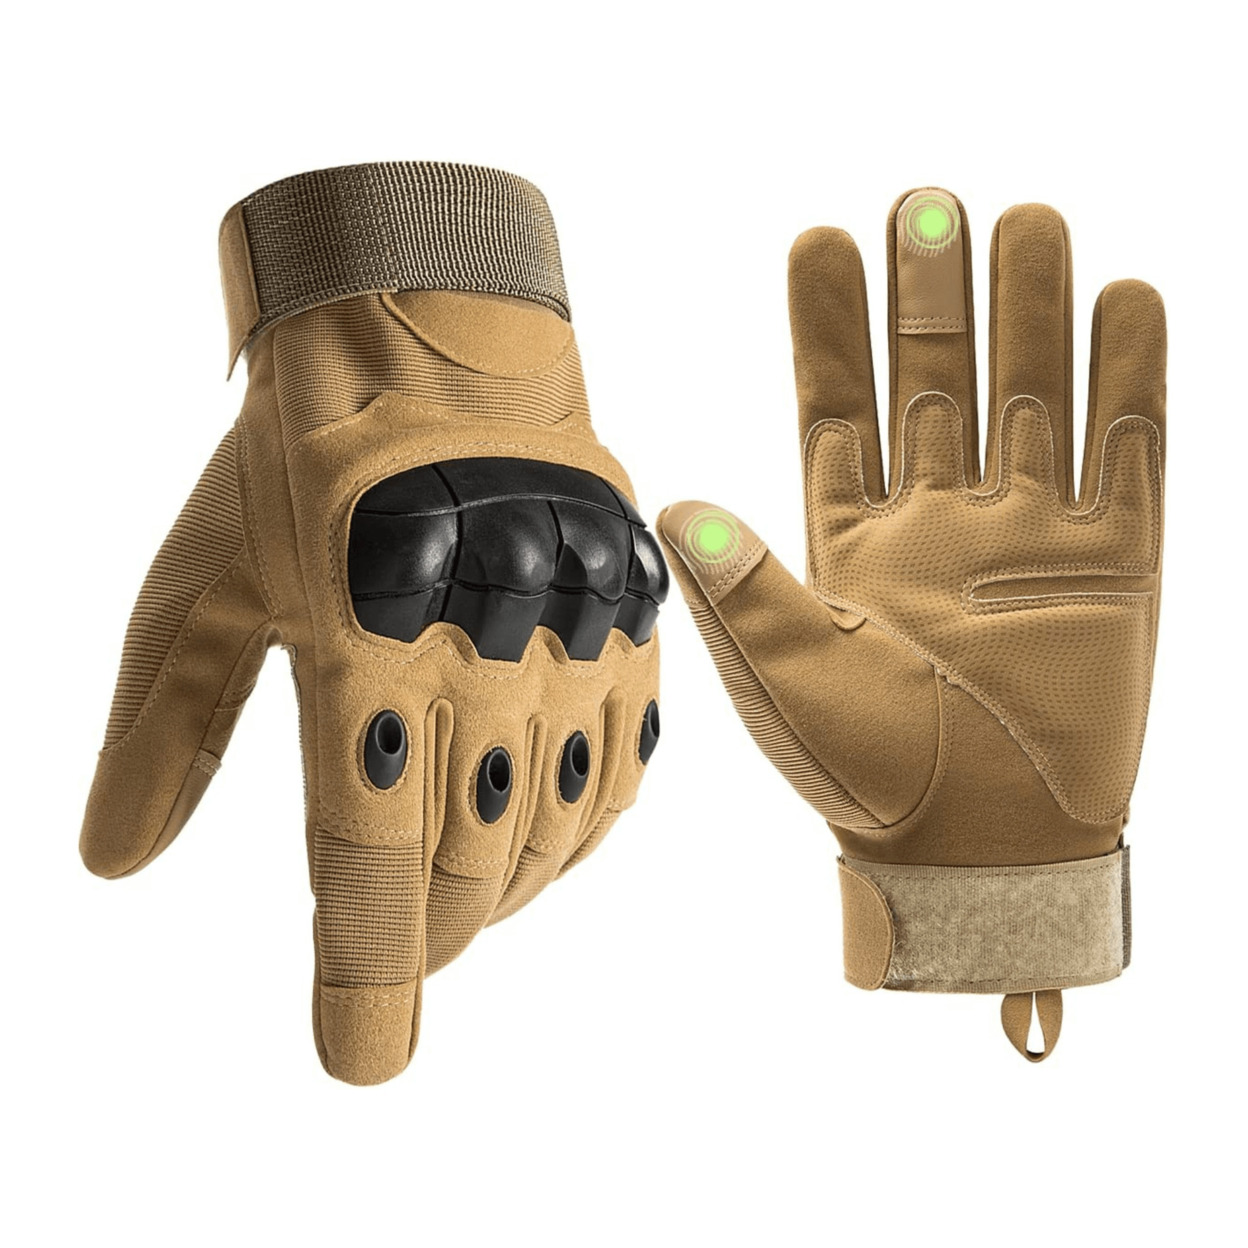 Tactical Military Airsoft Gloves For Outdoor Sports, Paintball, And Motorcycling With Touchscreen Fingertip Capability - Tan, X-Large